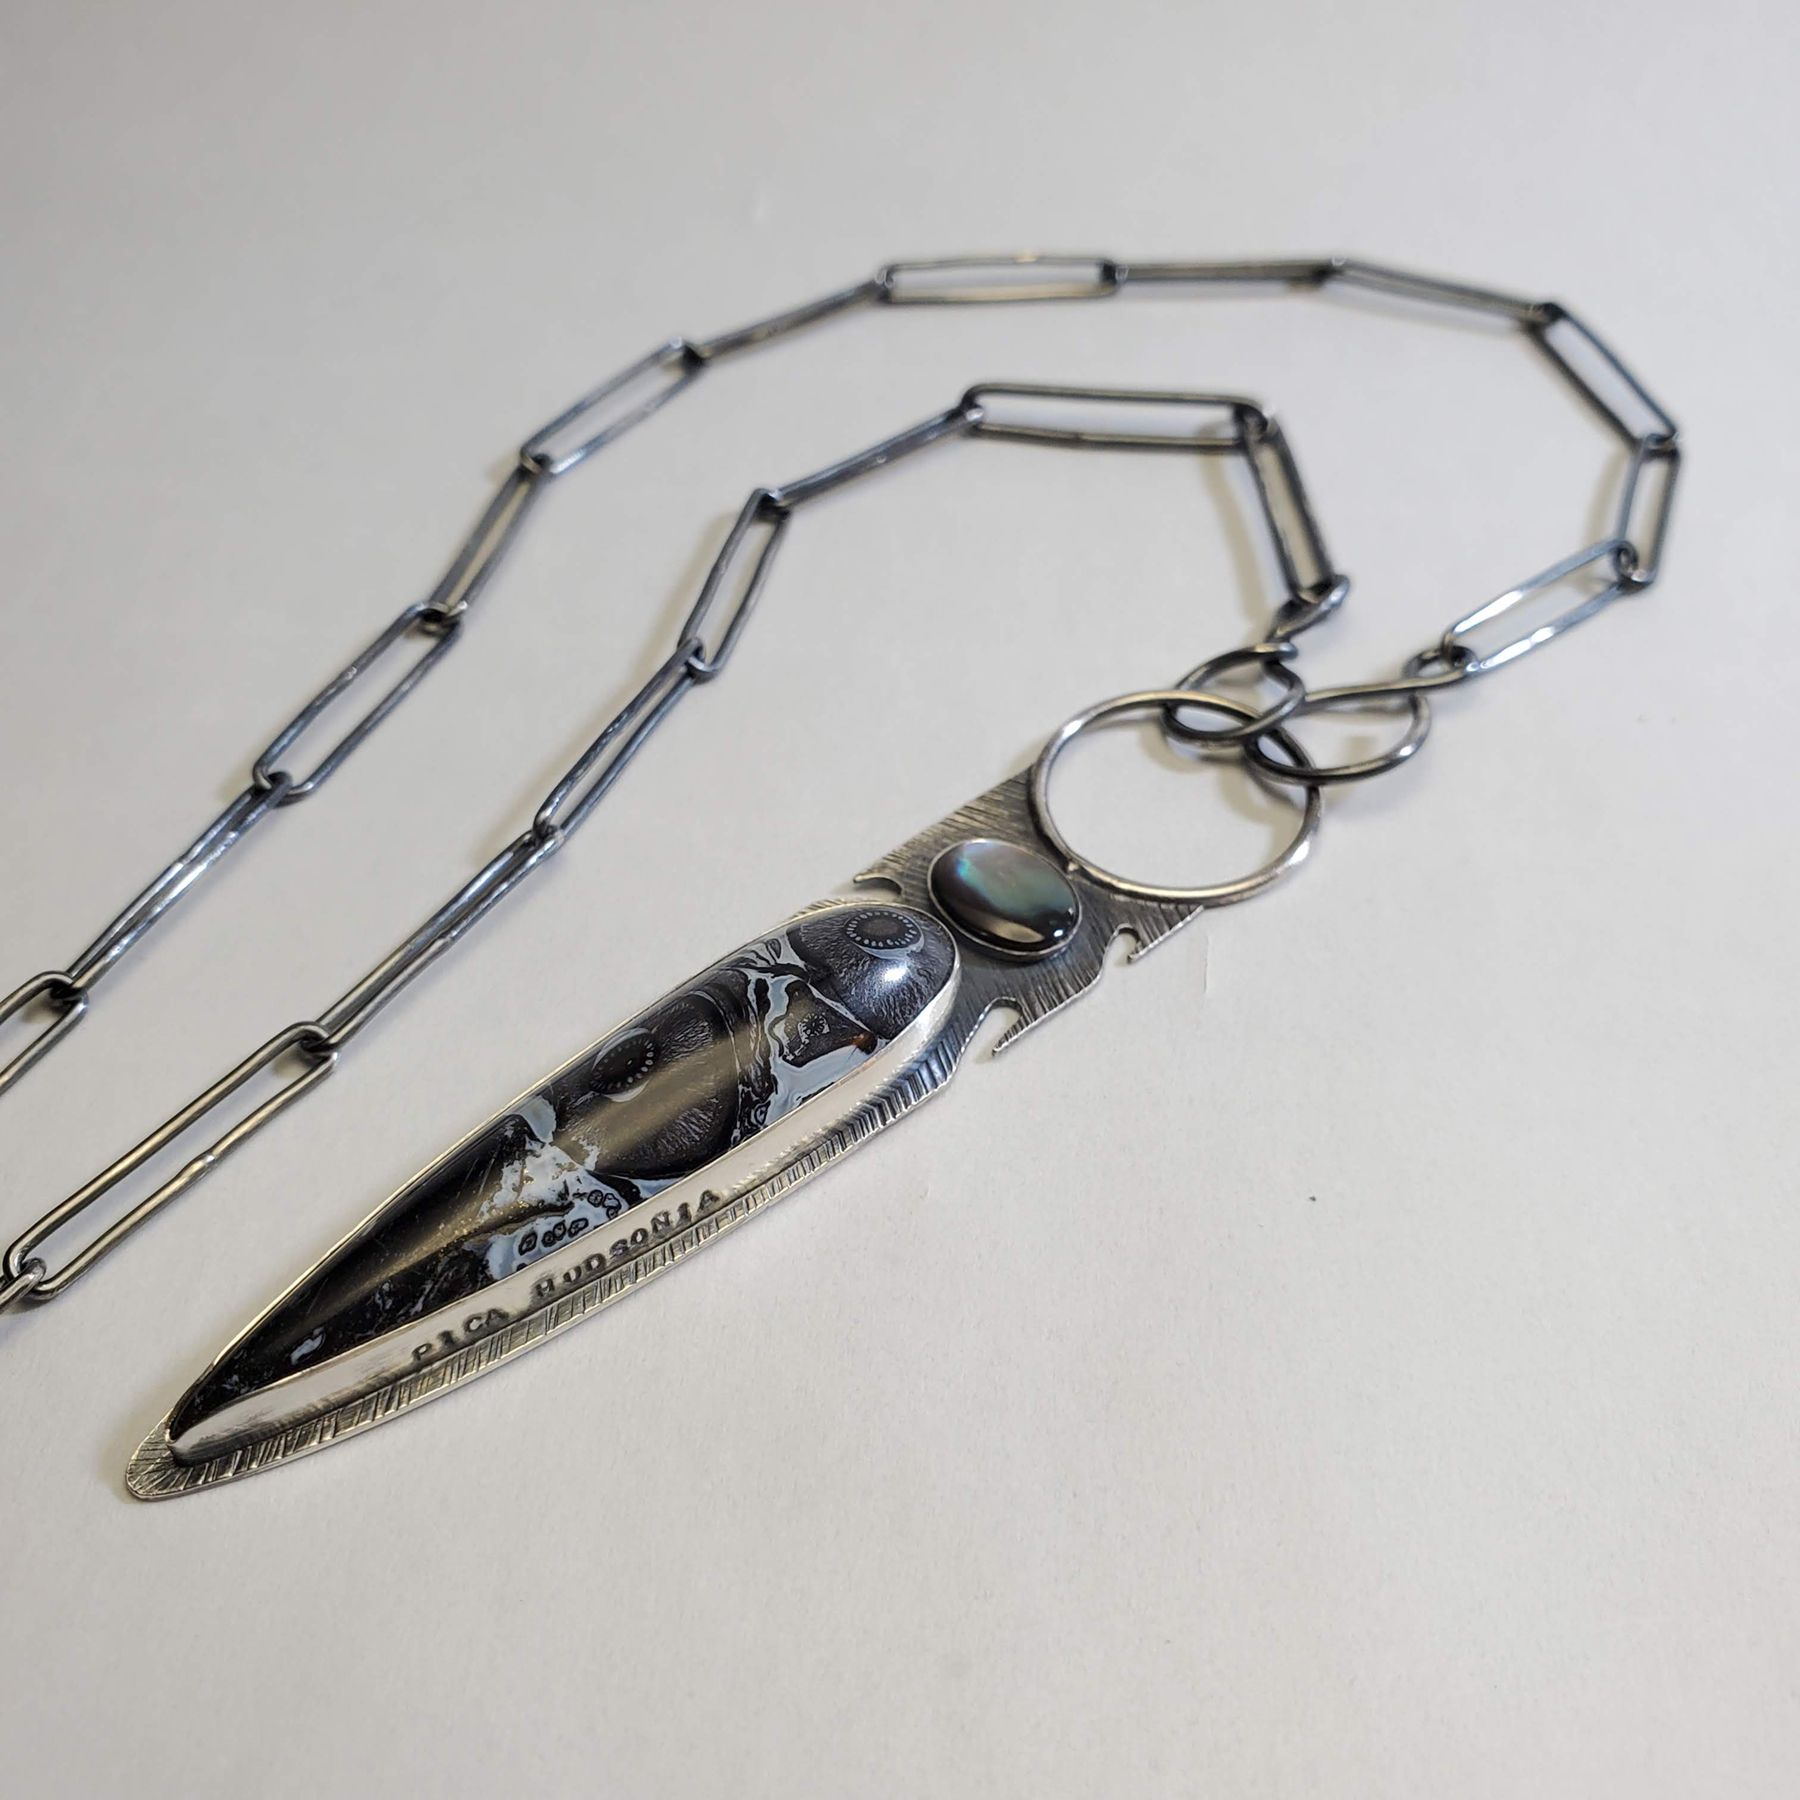 A sterling silver pendant with fossilized palm root and dark paua shell, image courtesy of Christen Booth